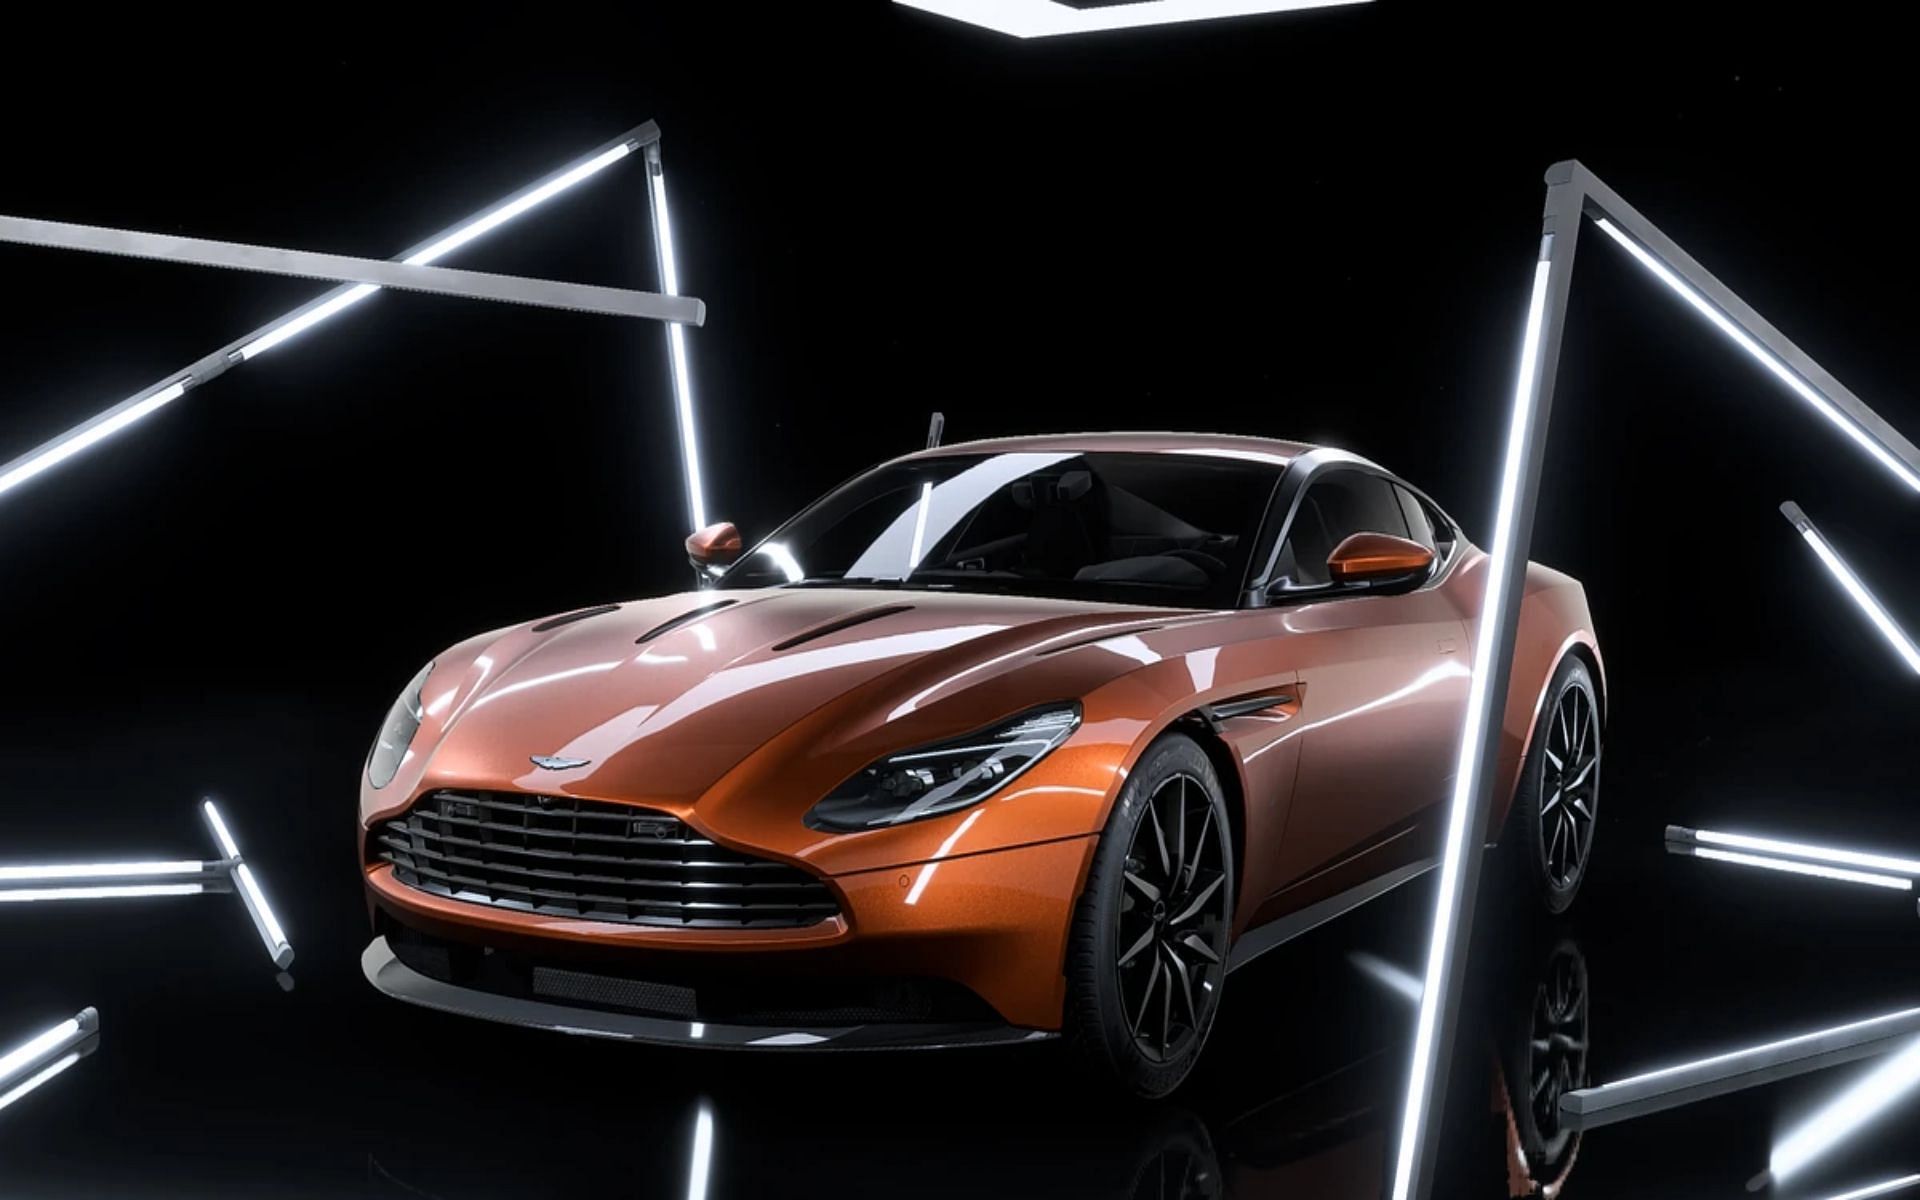 Aston Martin DB11 2017 from Need for Speed Unbound (Image via Electronic Arts)